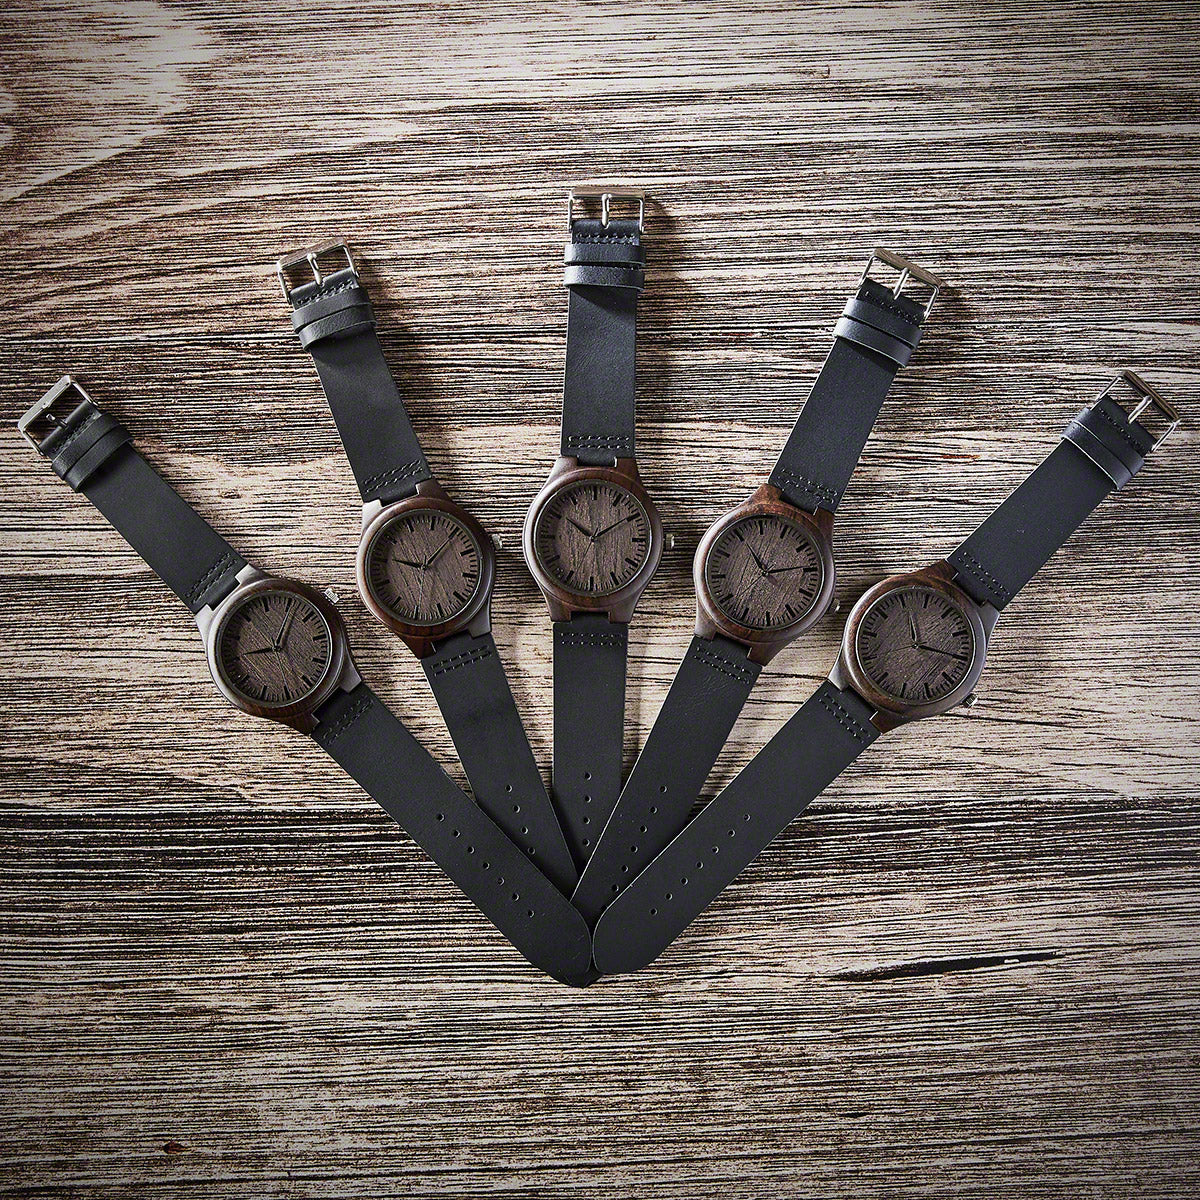 Personalized Watches for Groomsmen Set of 5 Wood Watches with Leather Bands